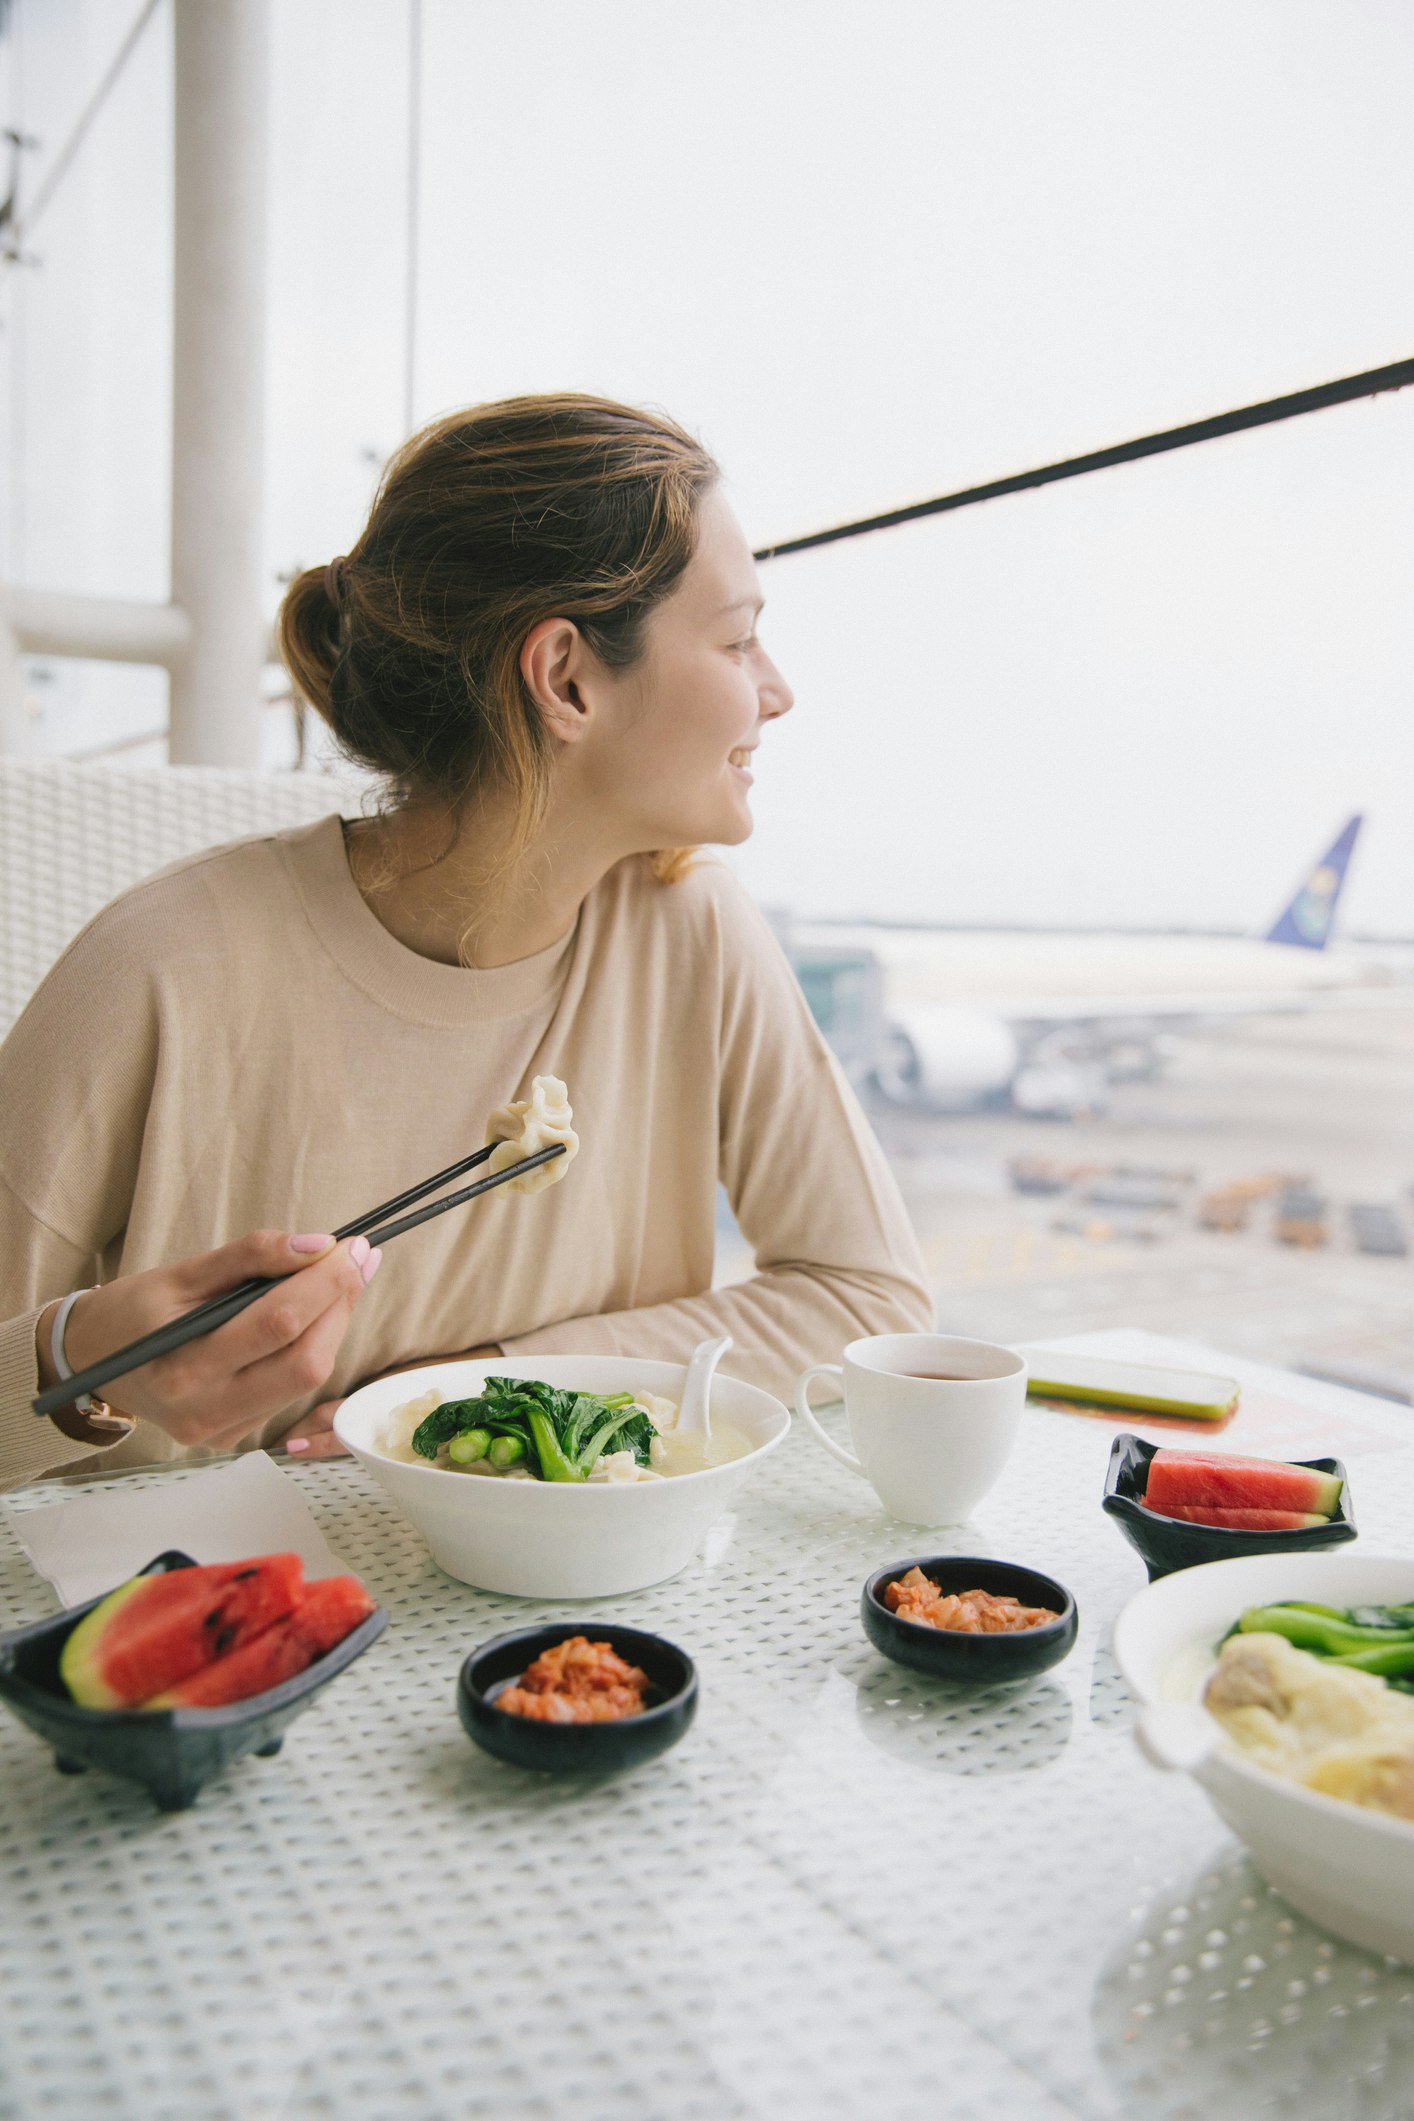 Woman Having Food In Restaurant While Looking Through Window At Airport